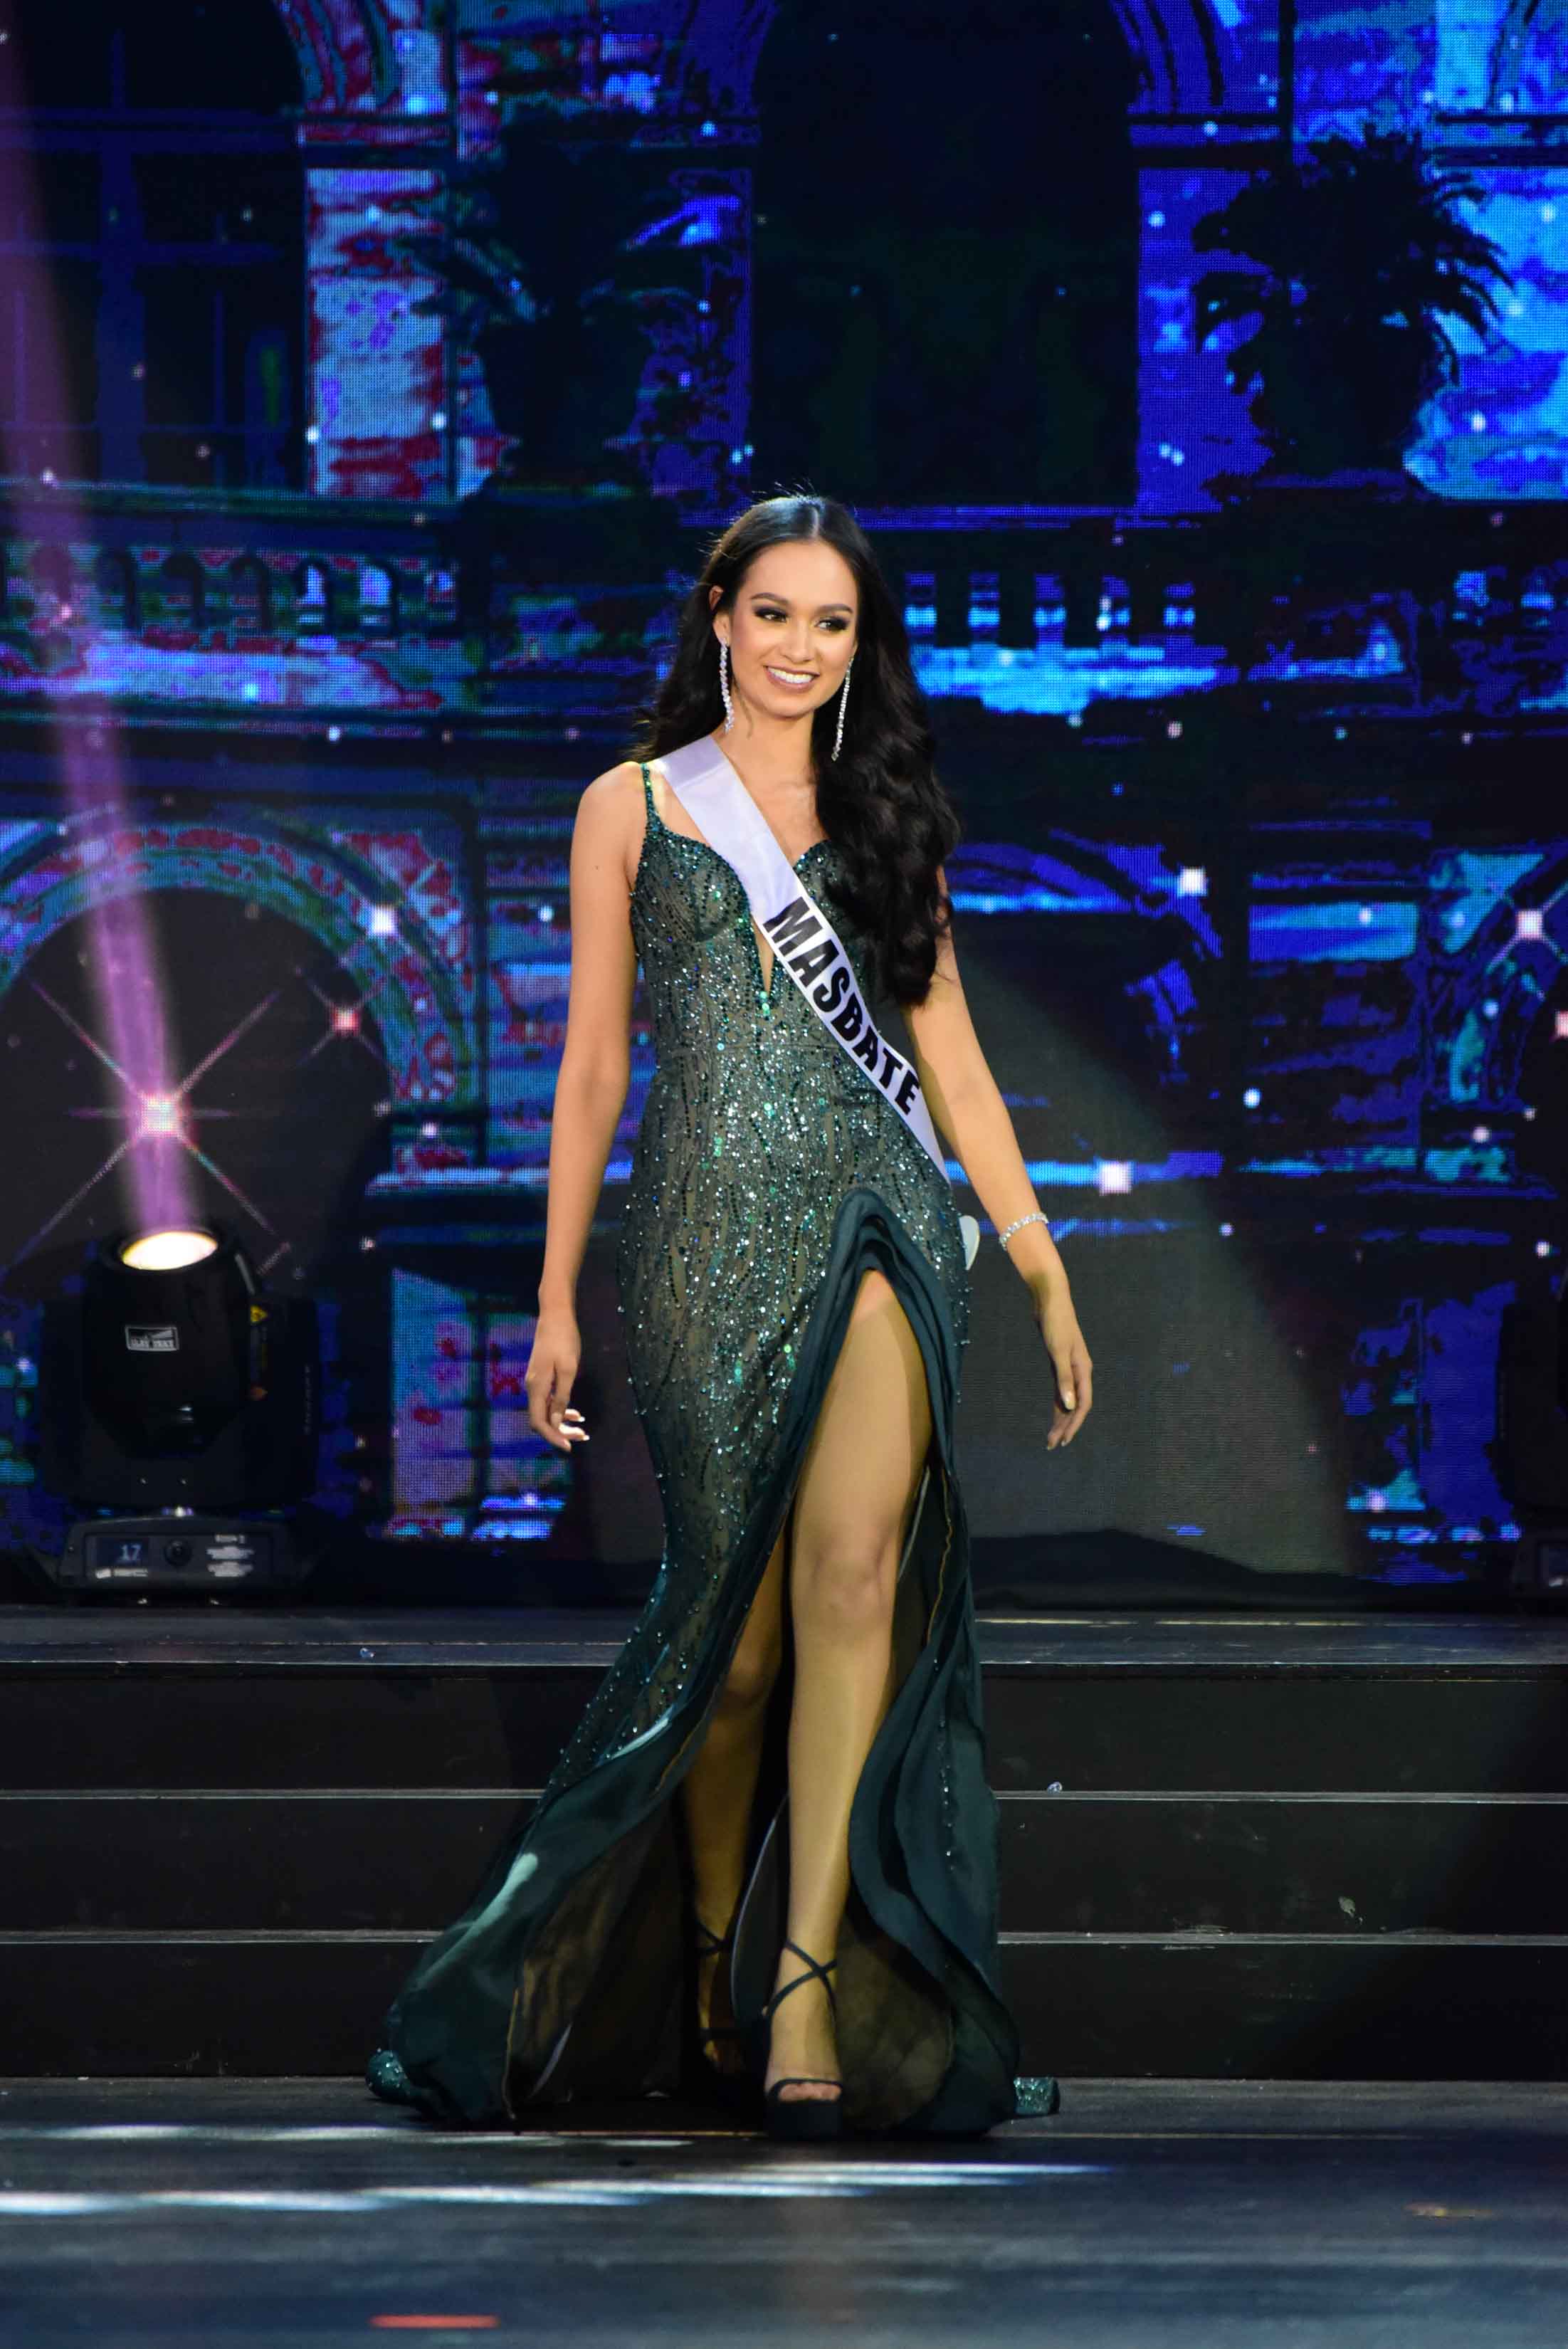 Binibining Pilipinas 2019 post-pageant review: Raise your flag, Philippines